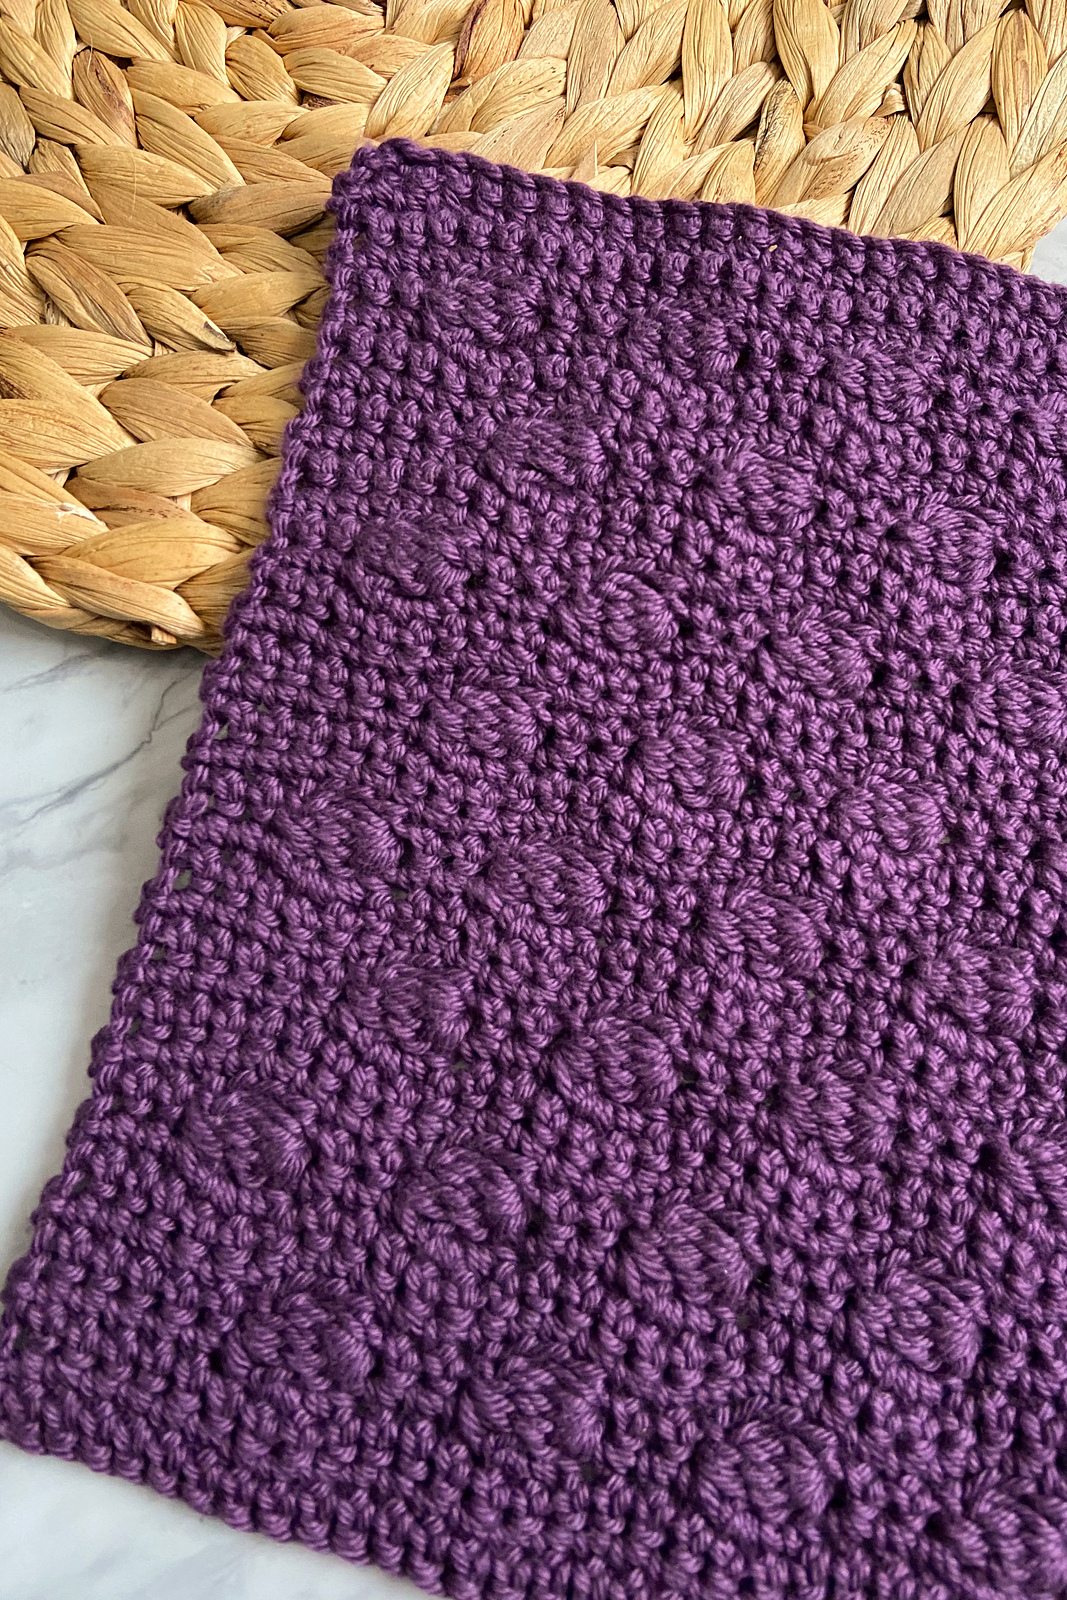 How to Crochet Mulberry Dishcloth